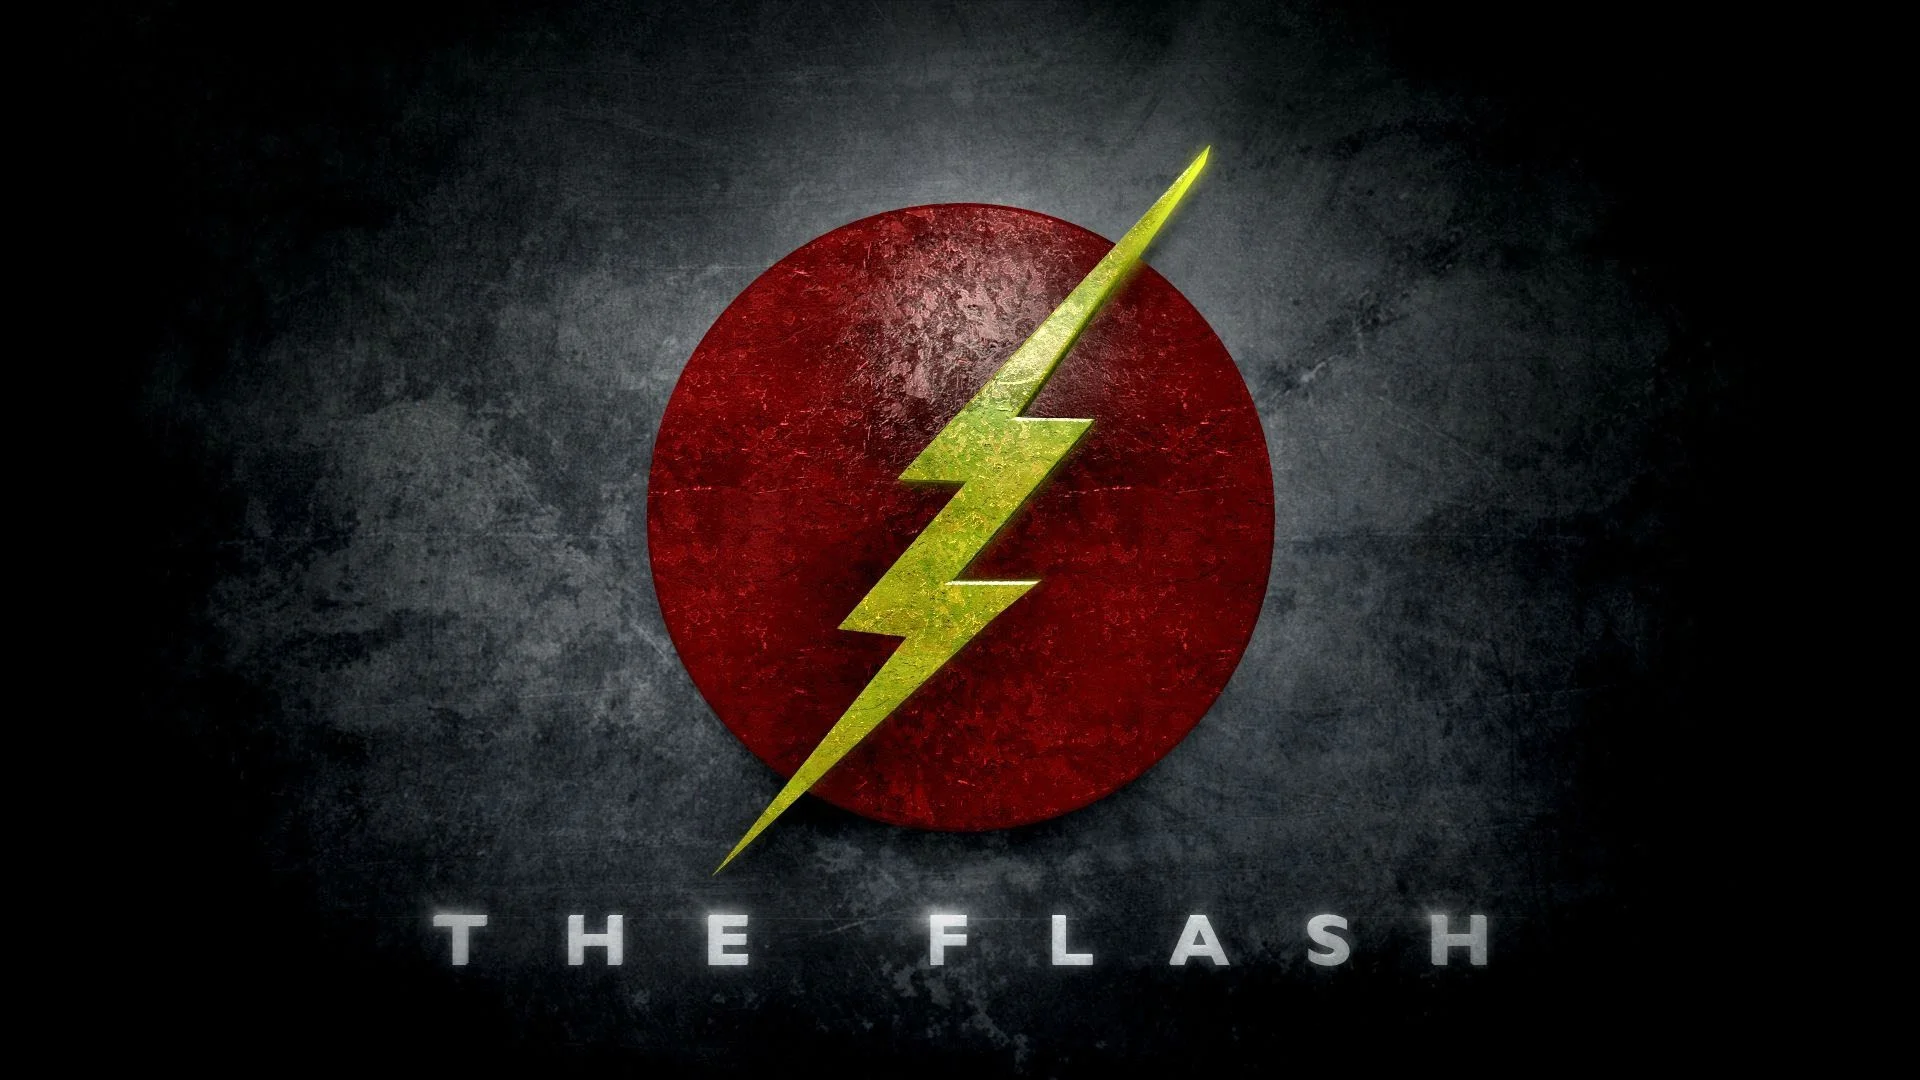 The Flash Logo Wallpaper 77 images